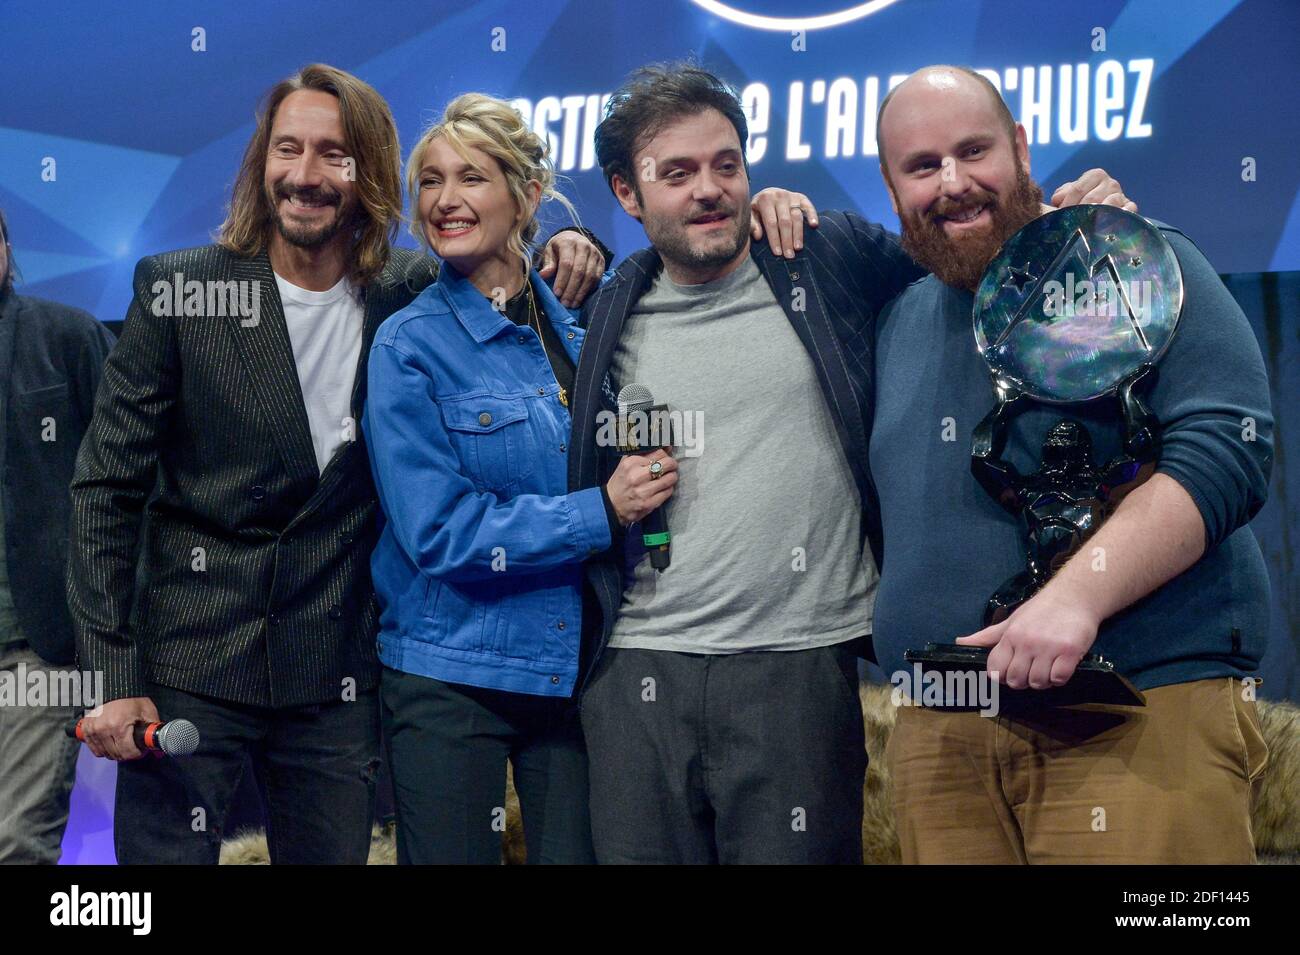 Caroline Anglade, Johann Dionnet, Marc Riso winning the Short Film Prize  and Bob Sinclar during the closing ceremony of the 23rd Comedy Film  Festival in L'Alpe d Huez, France on January 18,